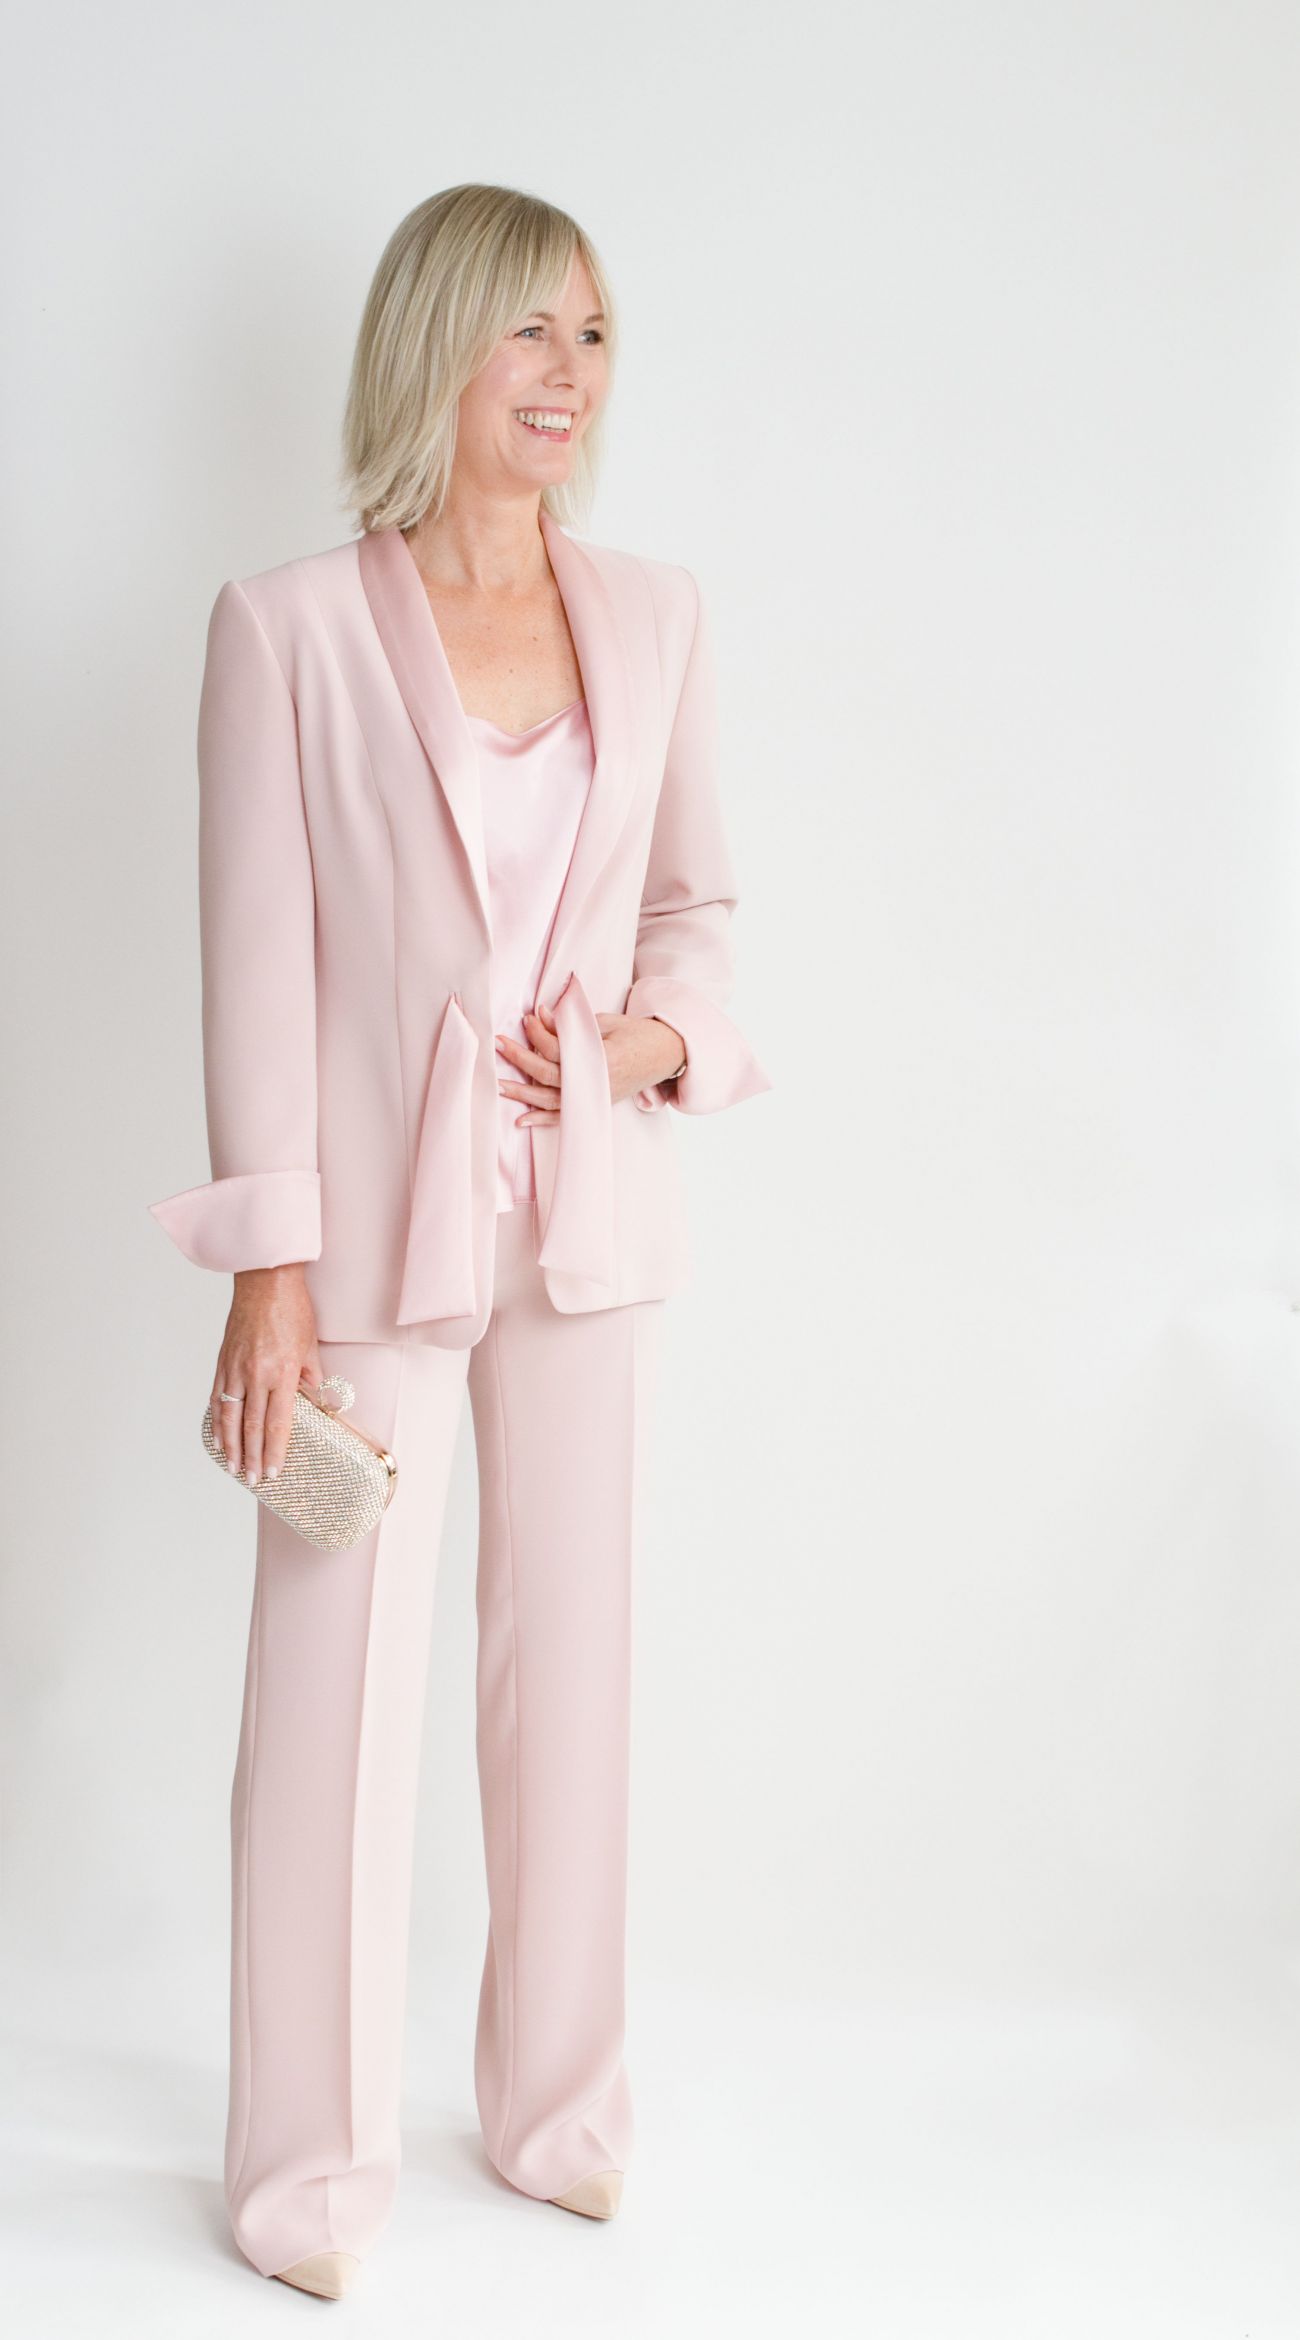 Tailored suits women | Shop trouser suits for women at NA-KD | NA-KD